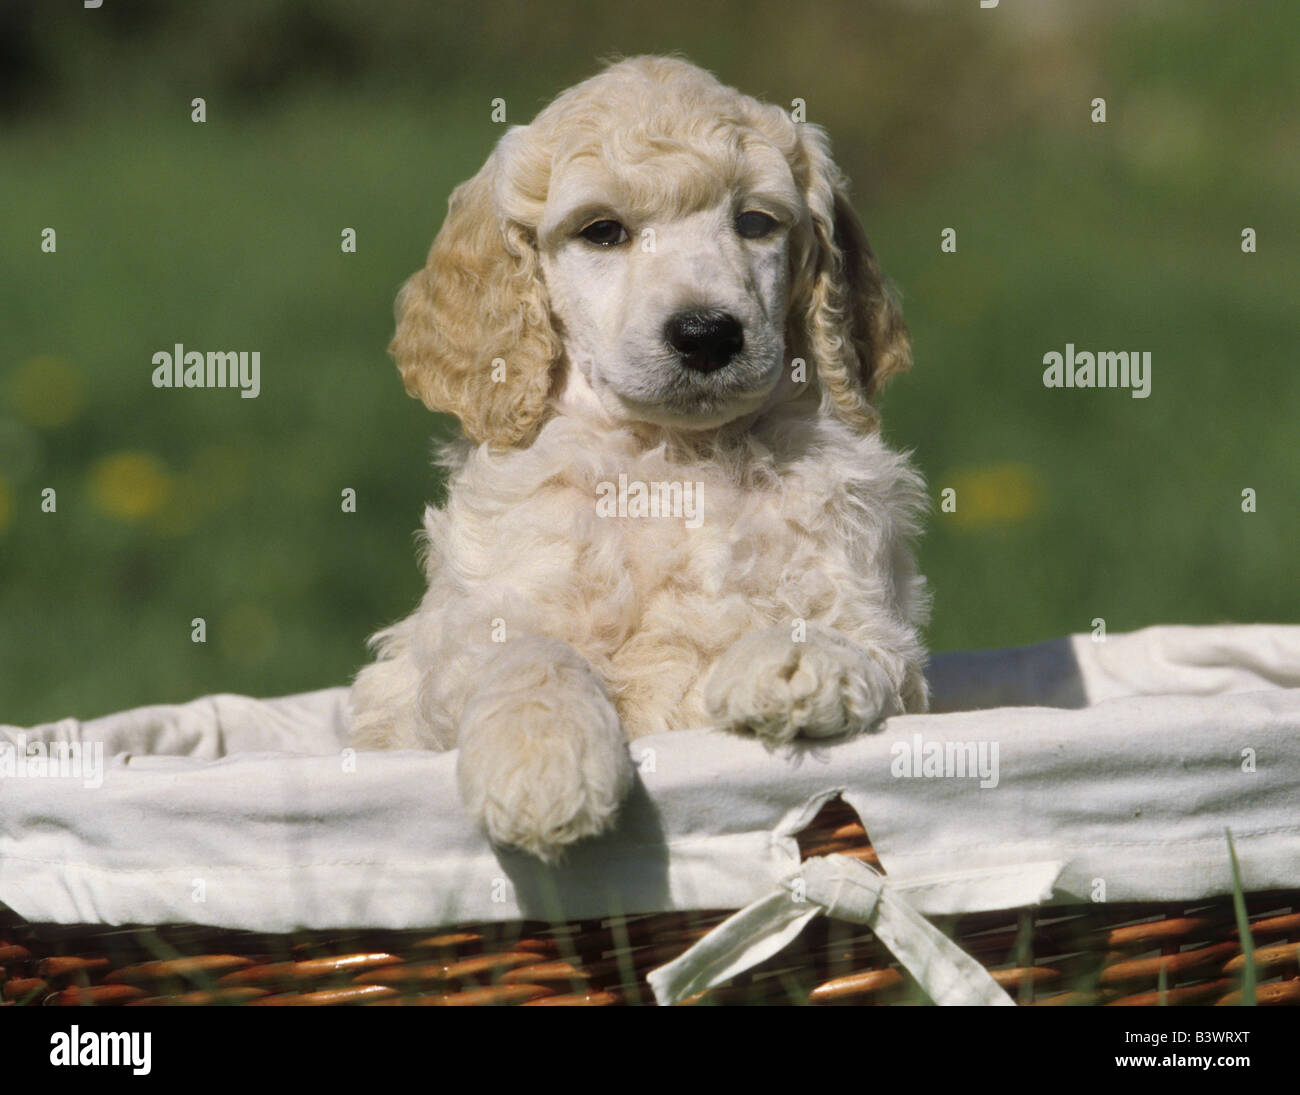 Close-up of a Standard poodle puppy in a basket Stock Photo